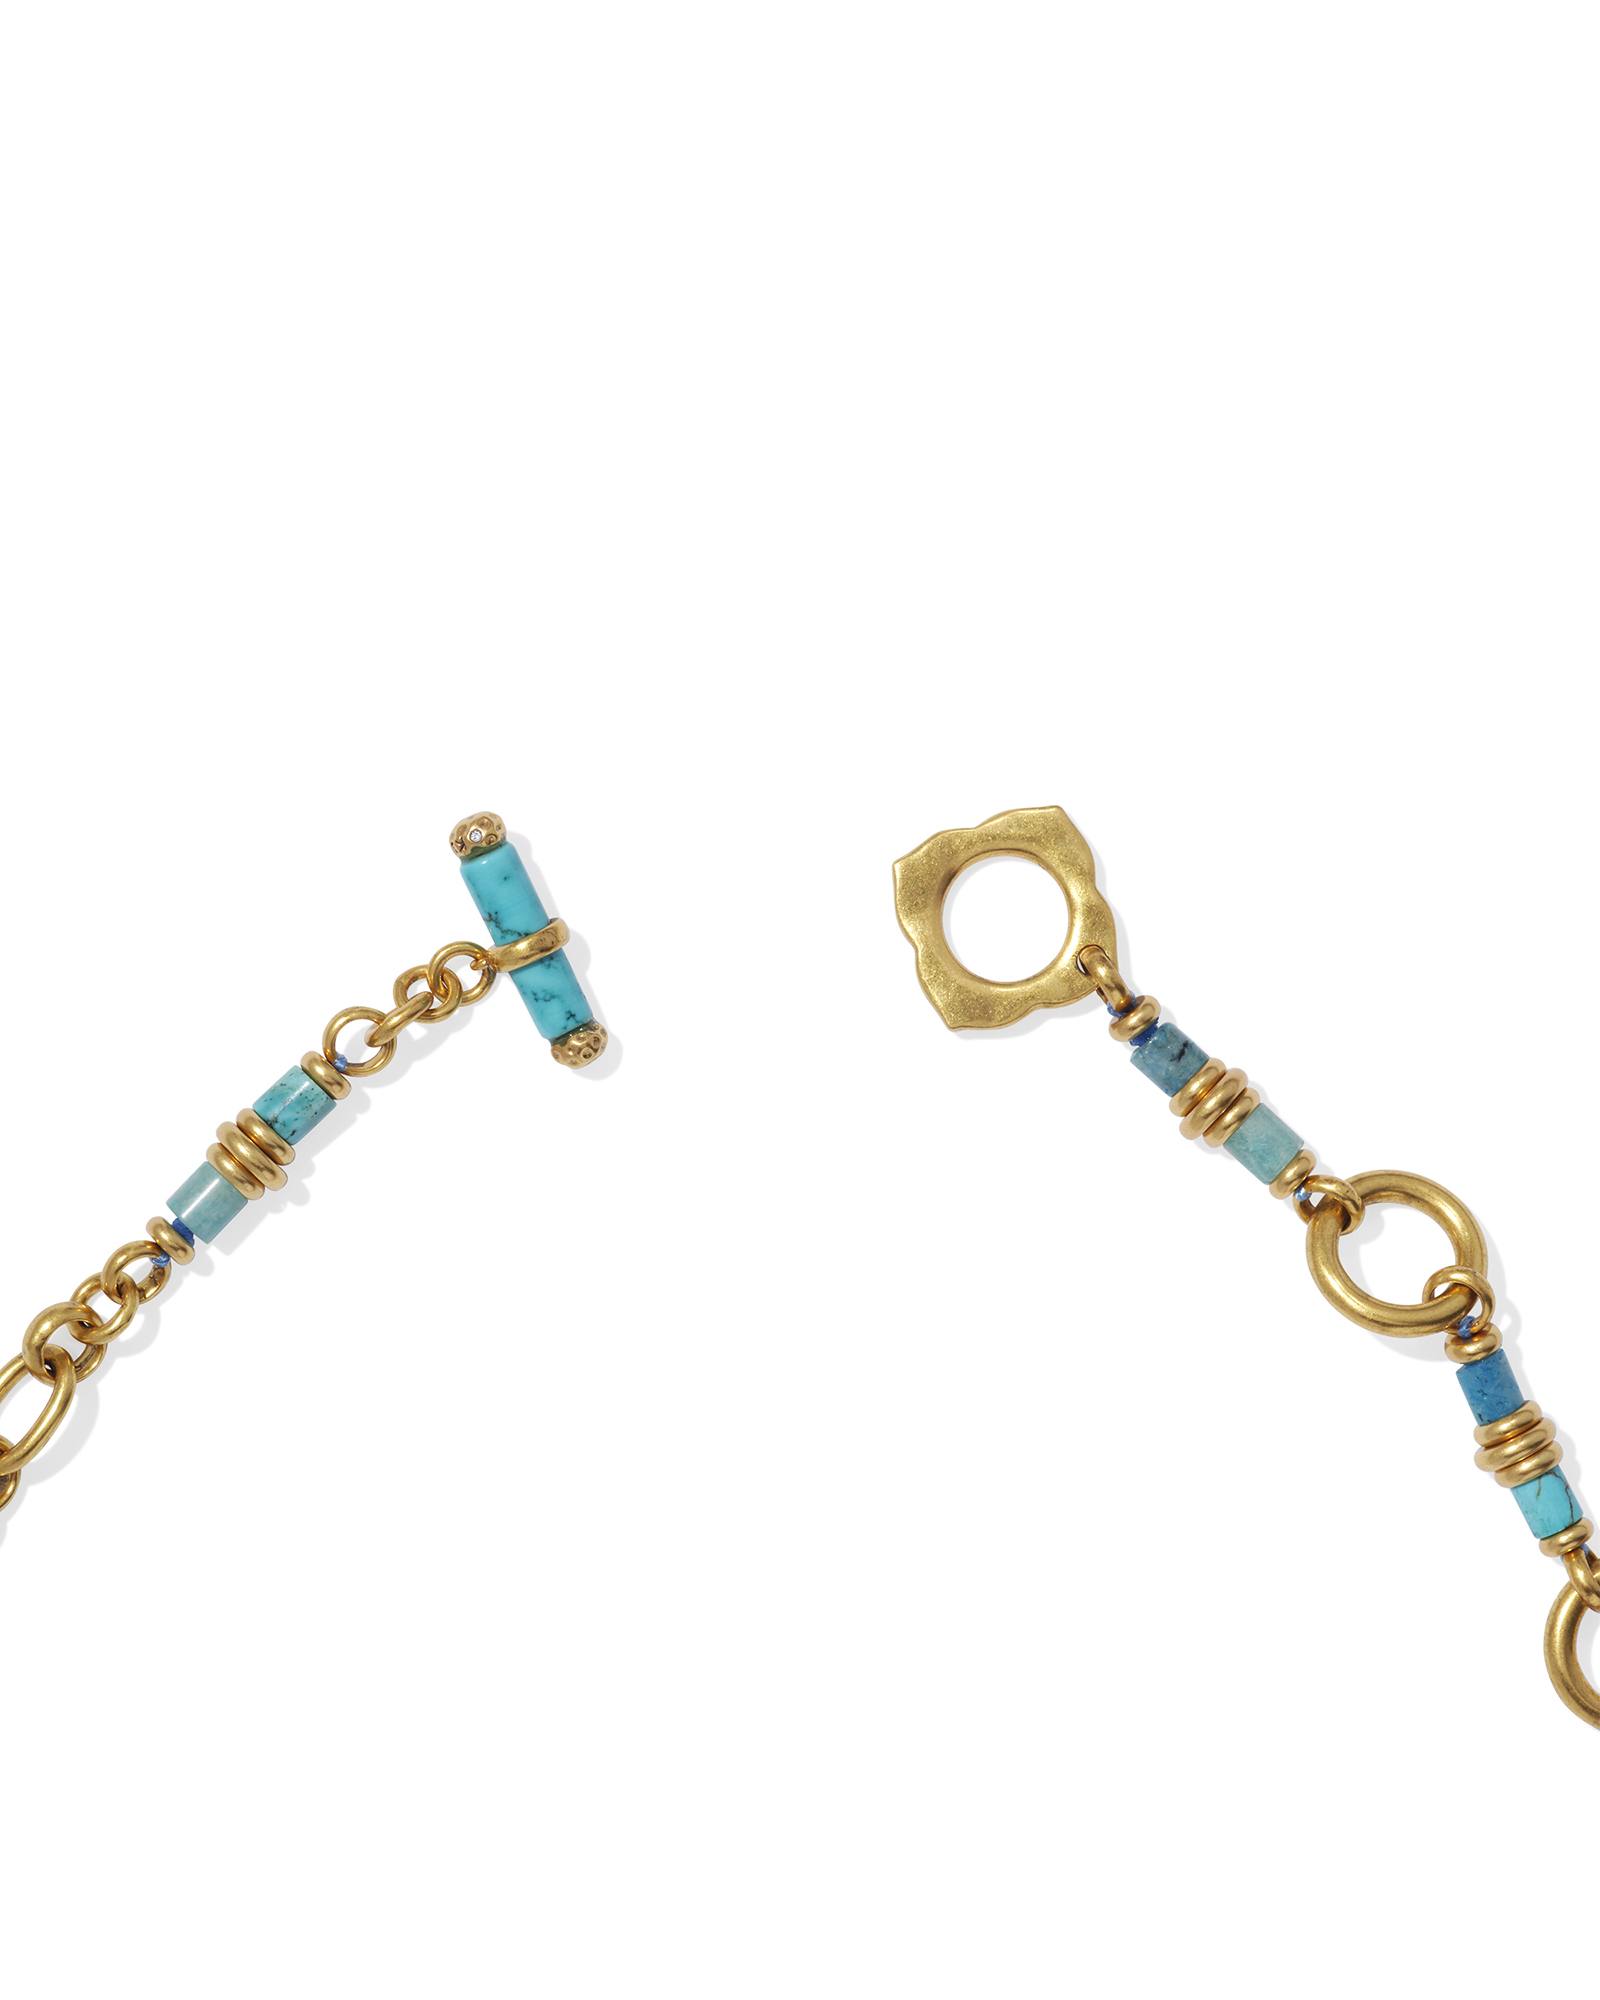 Bree Vintage Gold Chain Necklace in Turquoise Mix